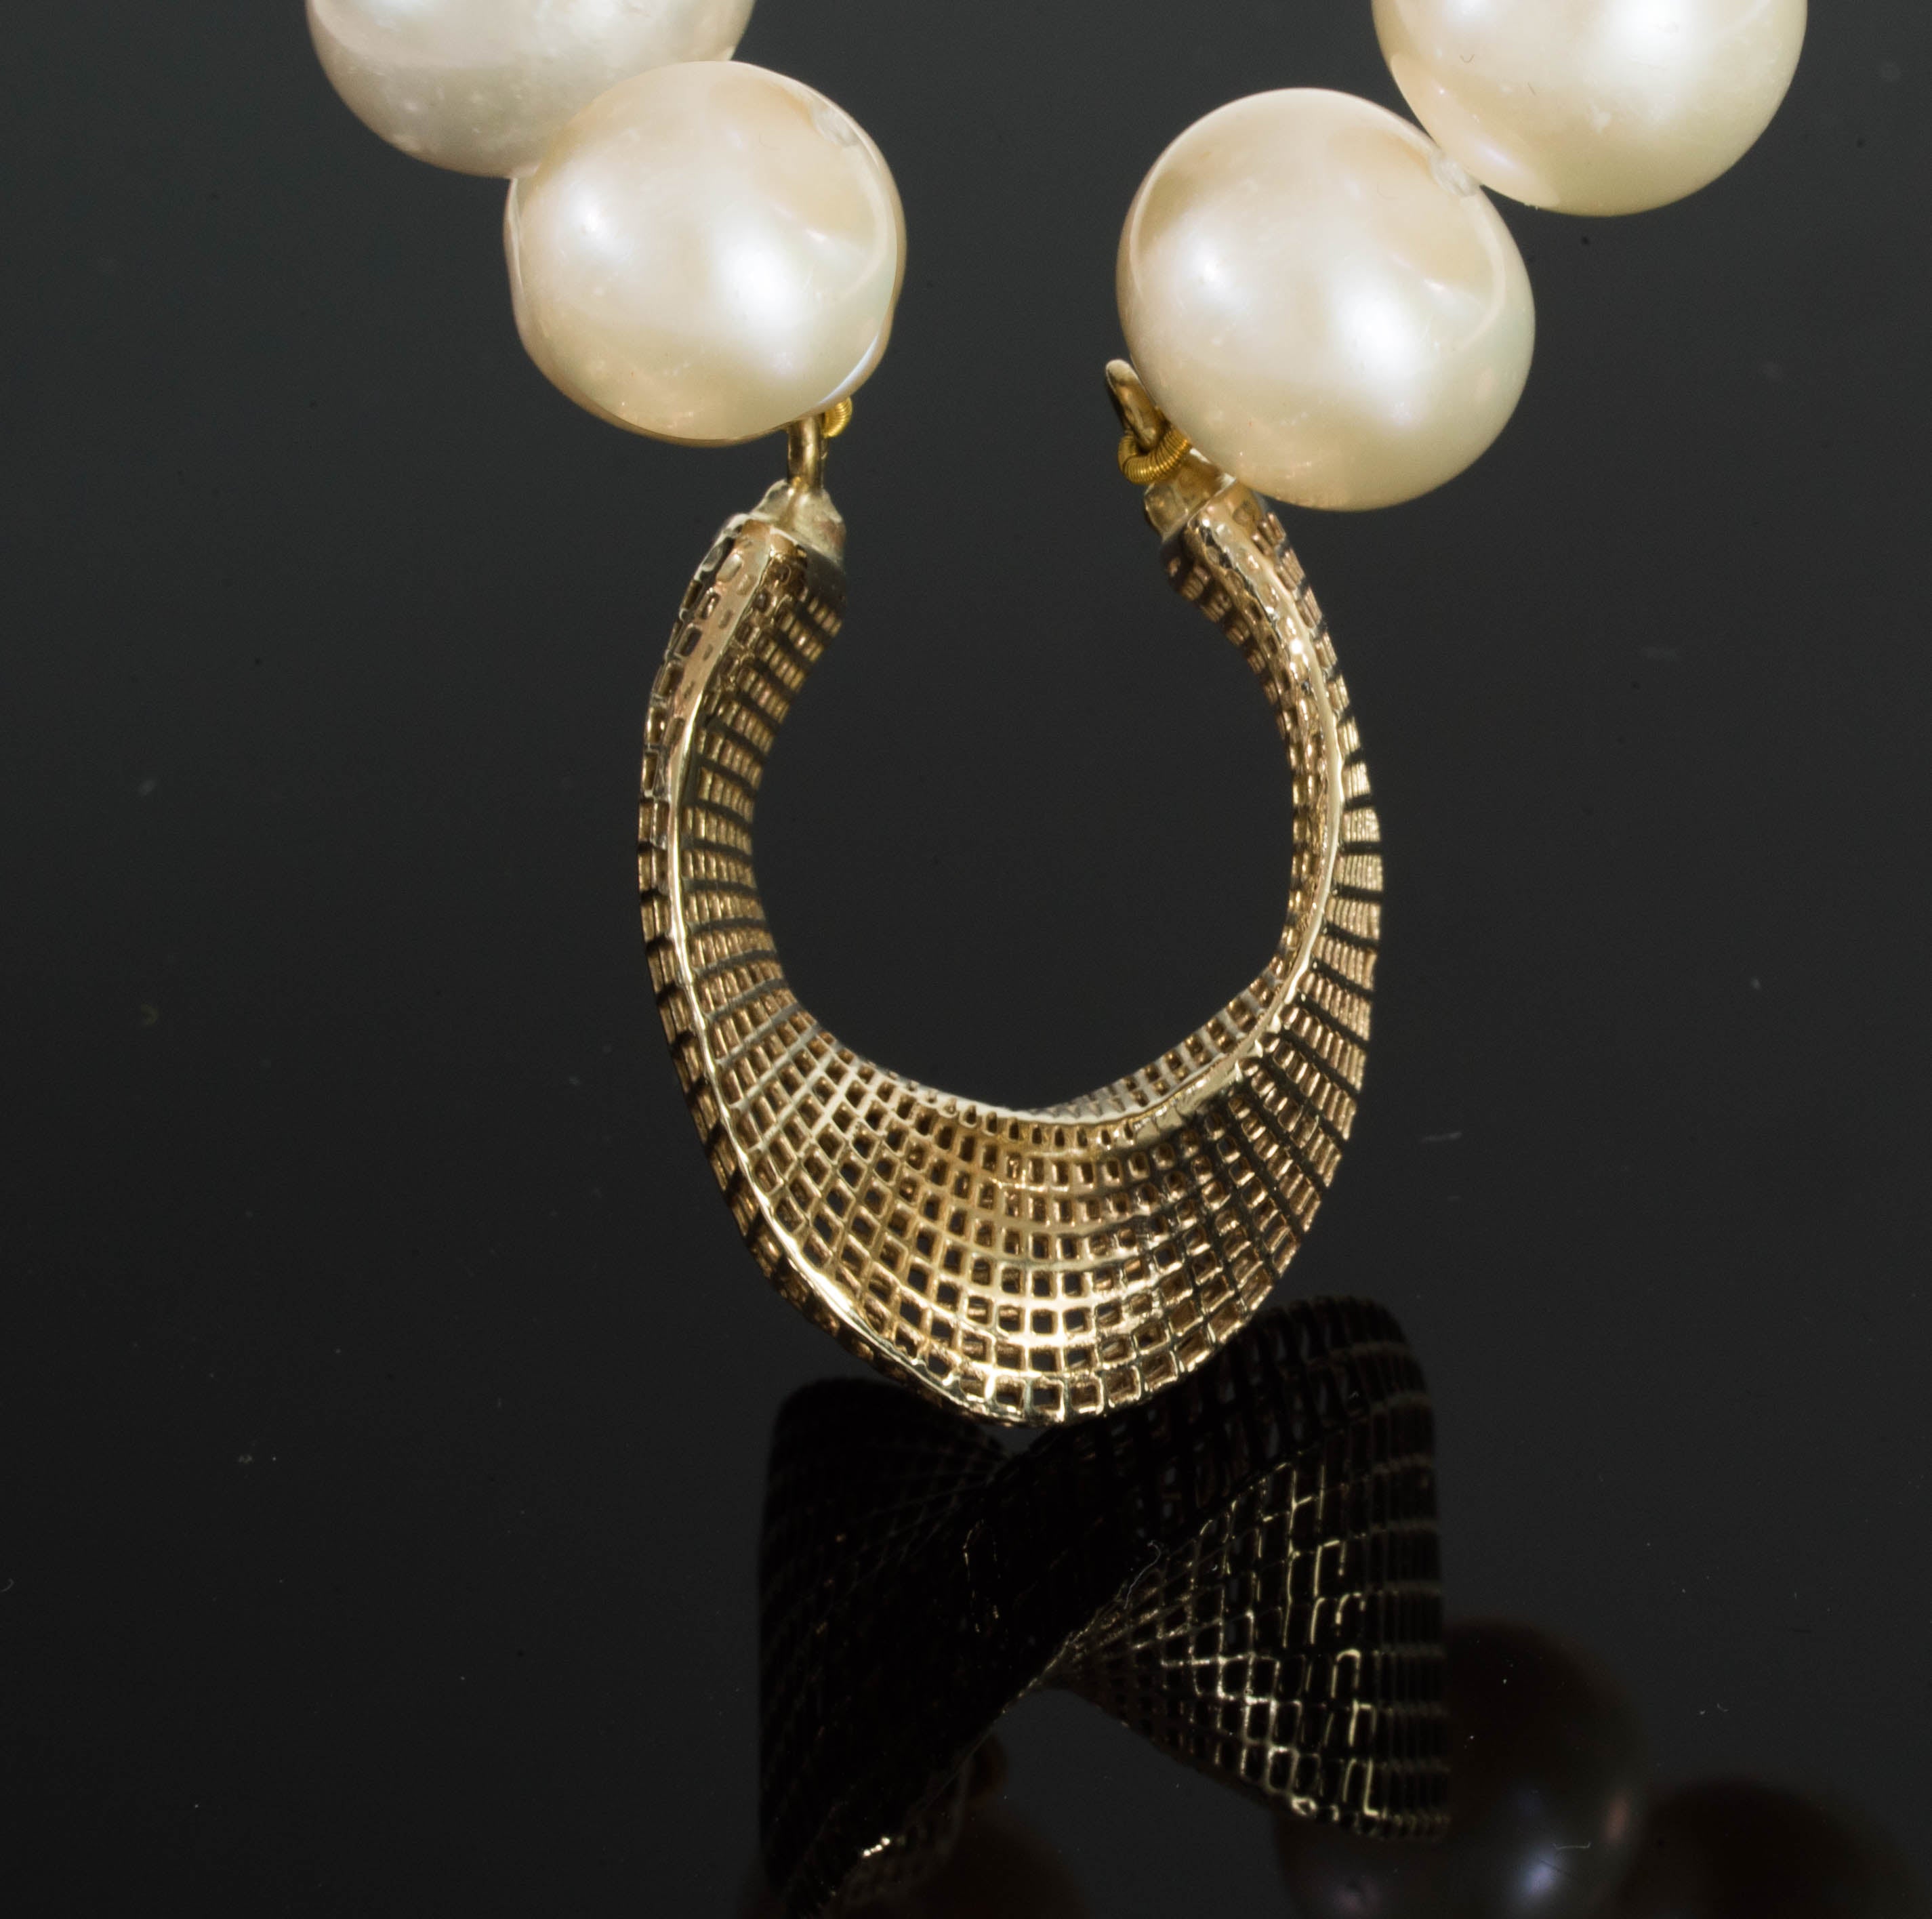 14K -  Freshwater Pearls Necklace - Net mobius center piece